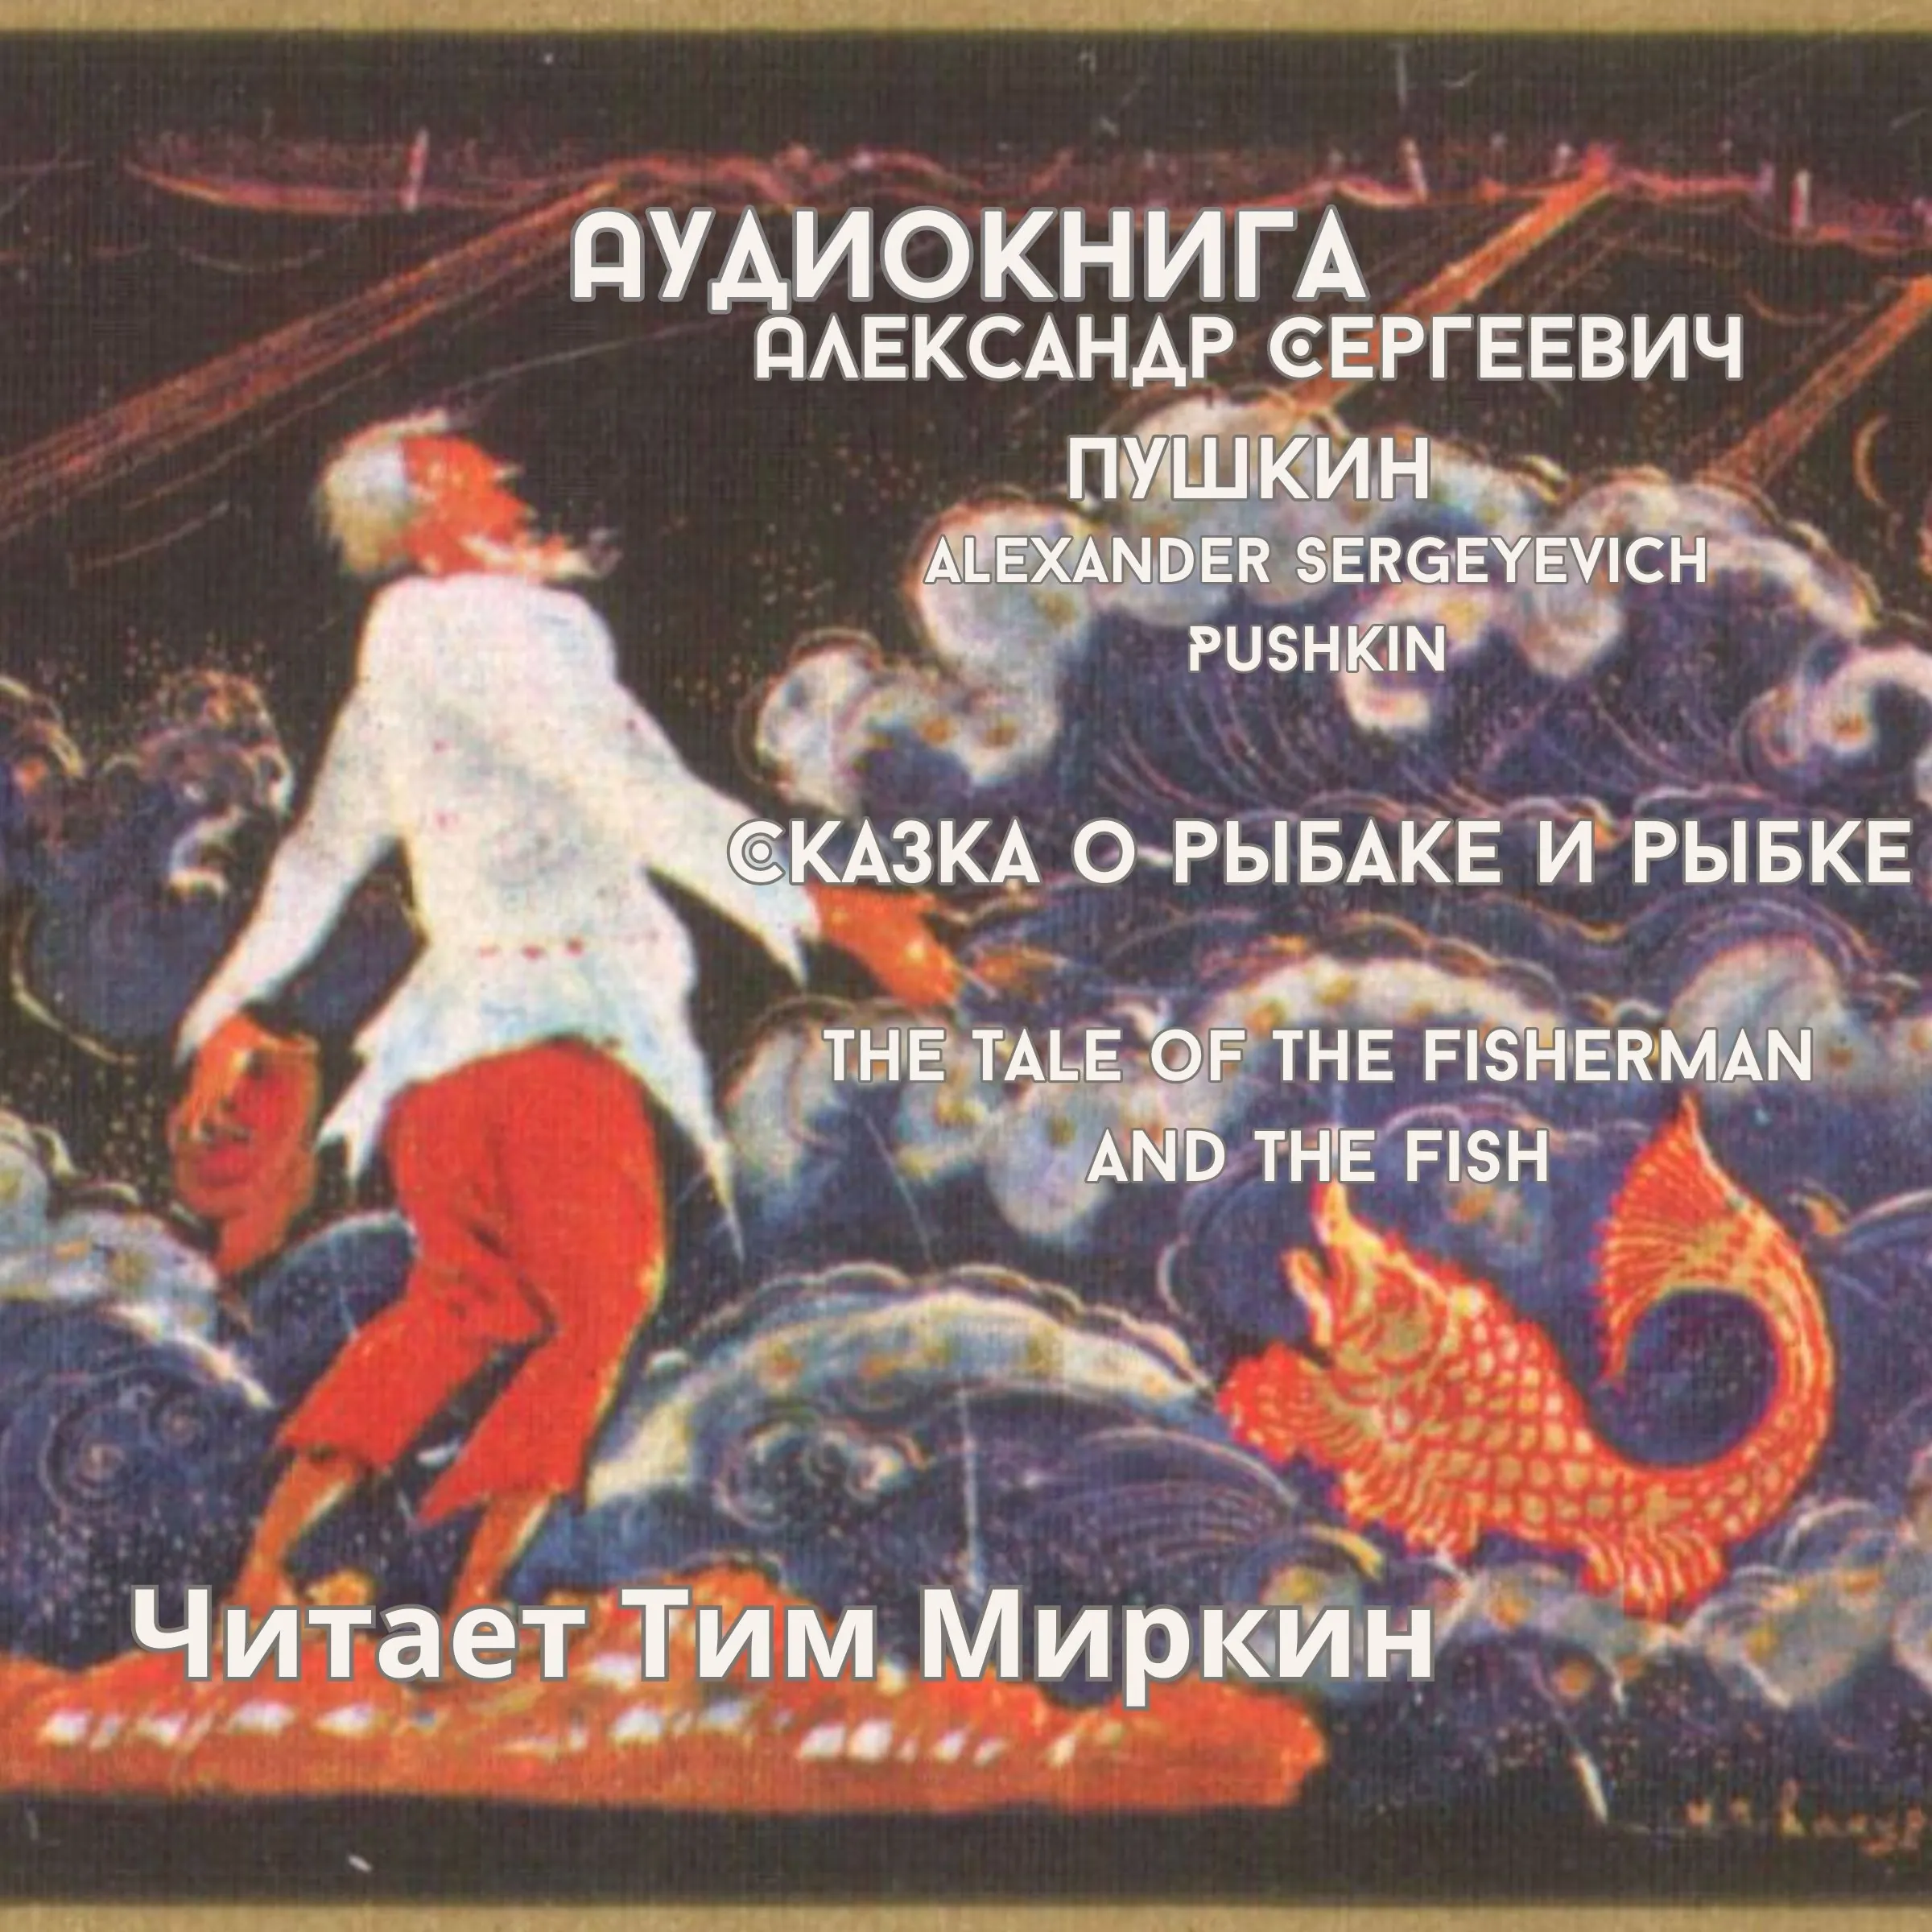 The Tale of the Fisherman and the Fish by Alexander Sergeyevich Pushkin Audiobook